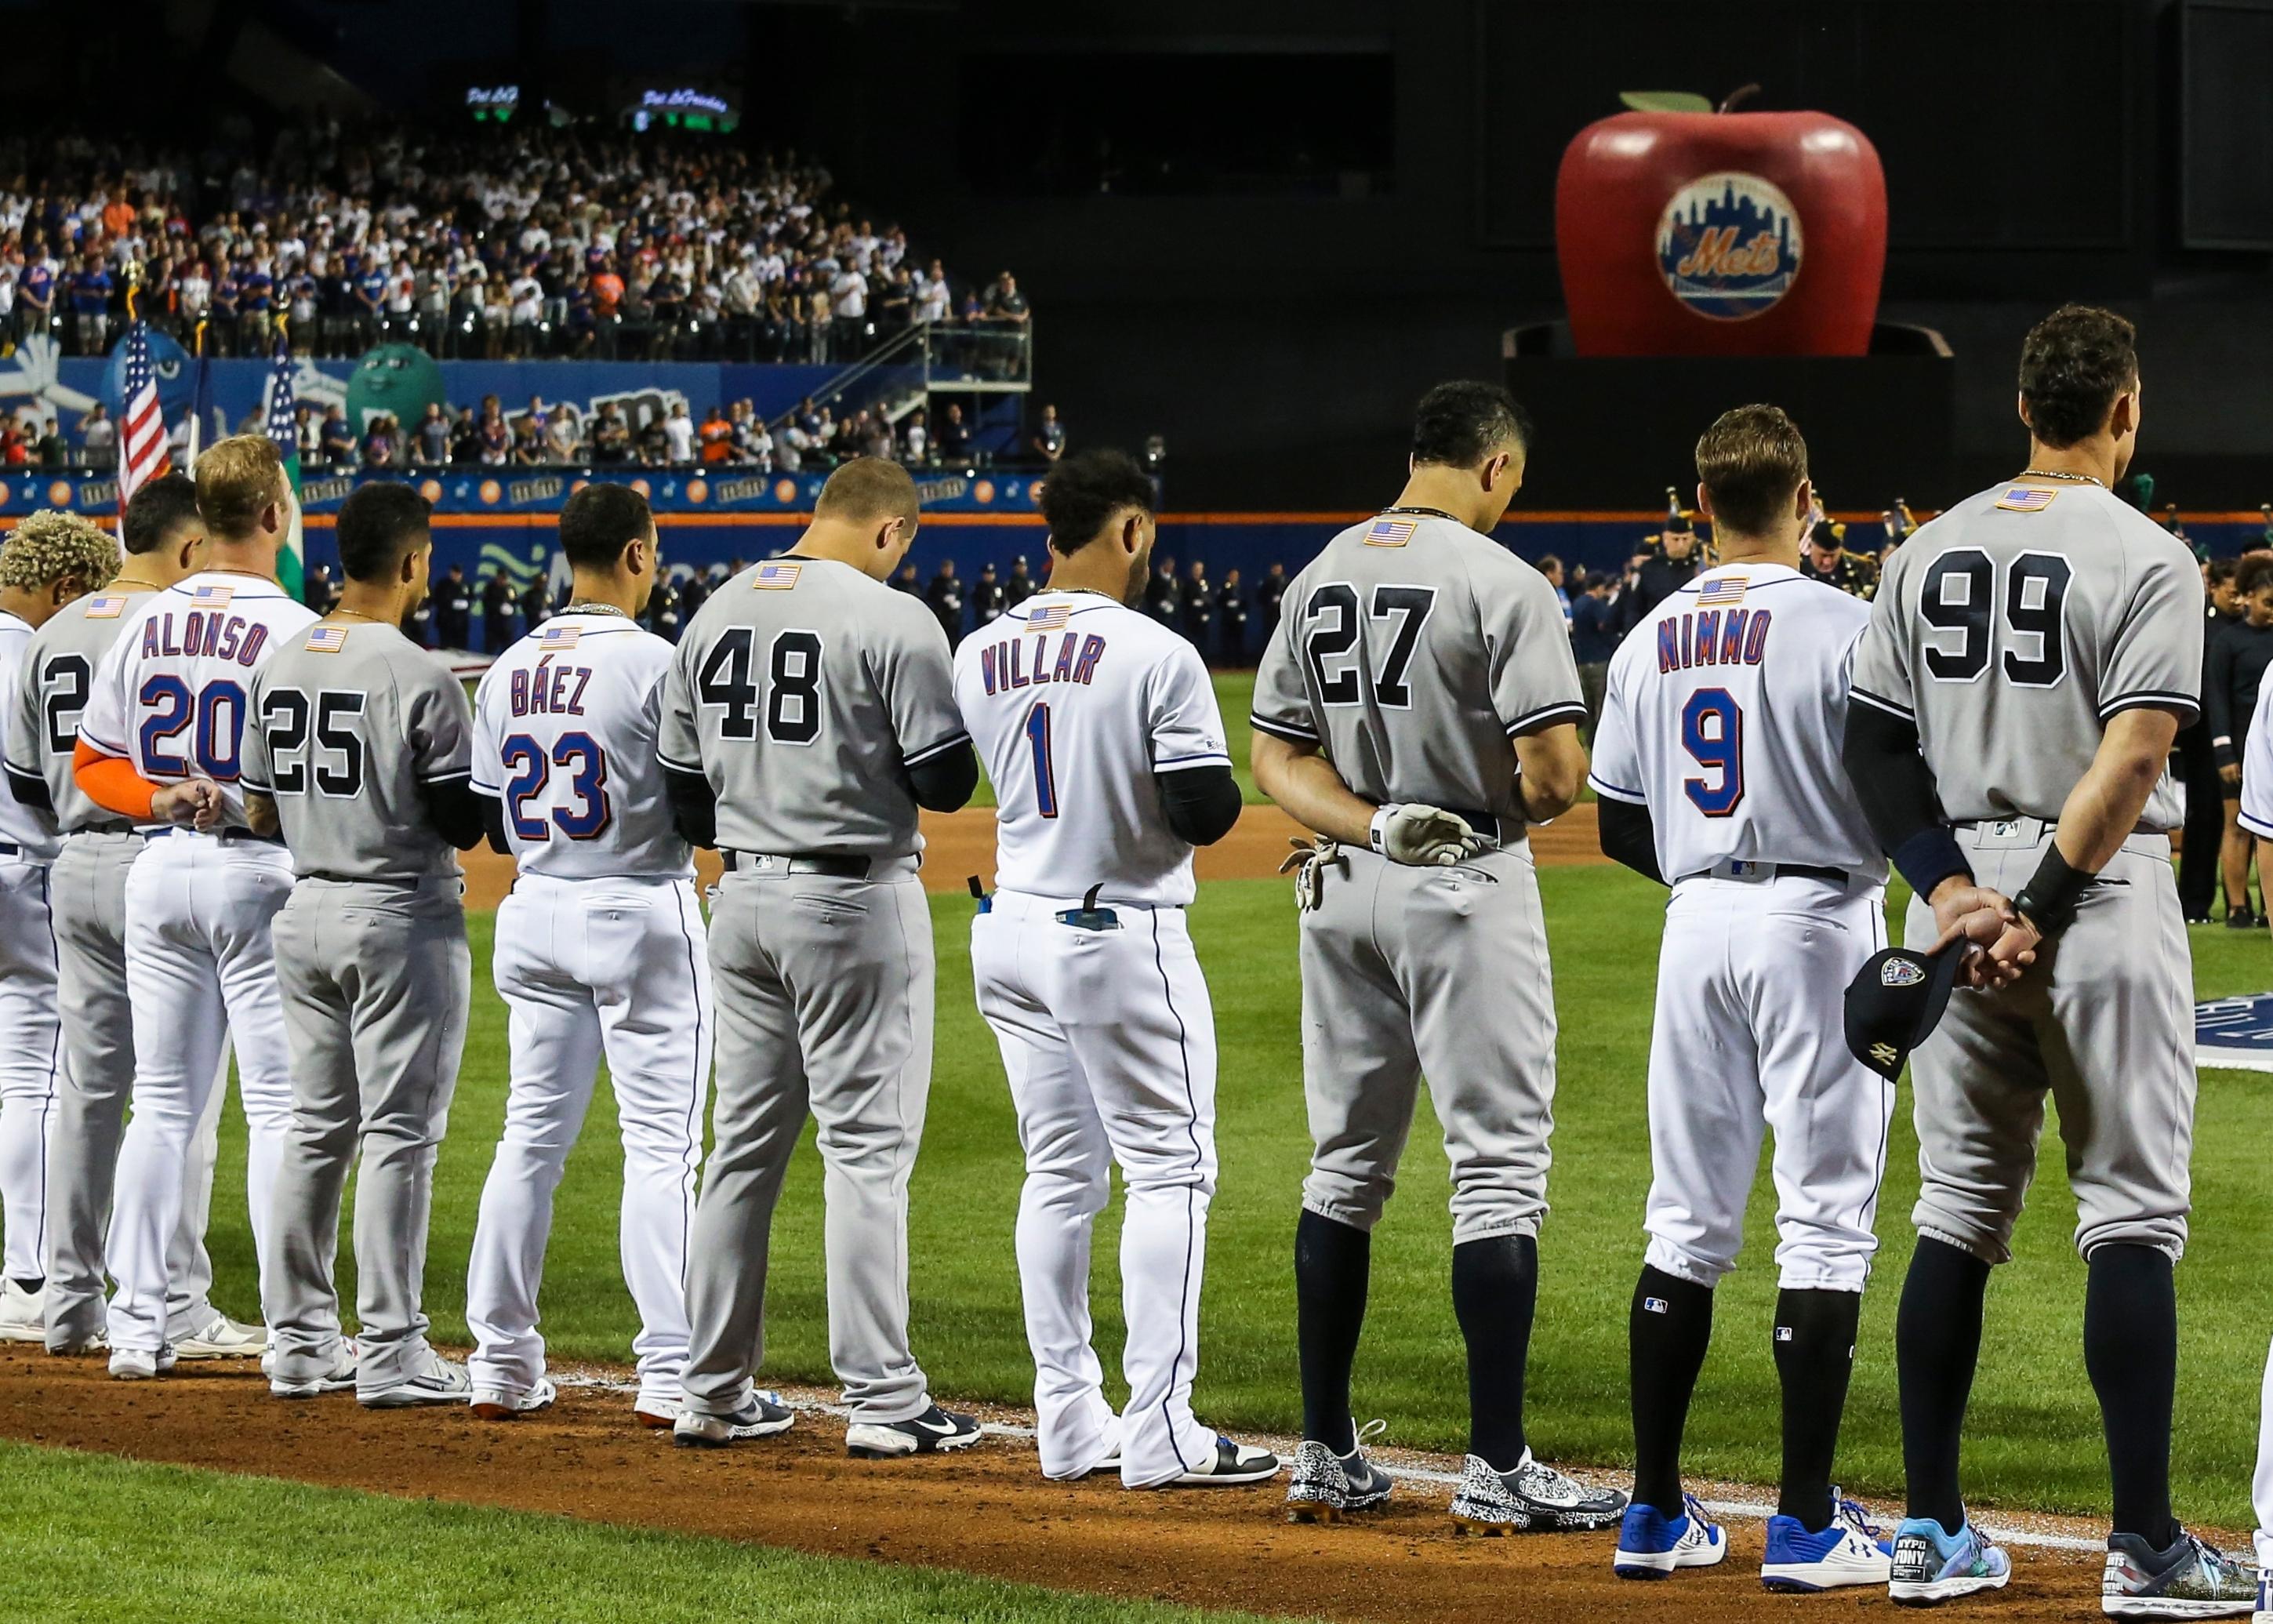 Sep 11, 2021; New York City, New York, USA; Members of the New York Yankees and New York Mets line up next to each other during the September 11 pre-game ceremonies at Citi Field. Mandatory Credit: Wendell Cruz-USA TODAY Sports / © Wendell Cruz-USA TODAY Sports